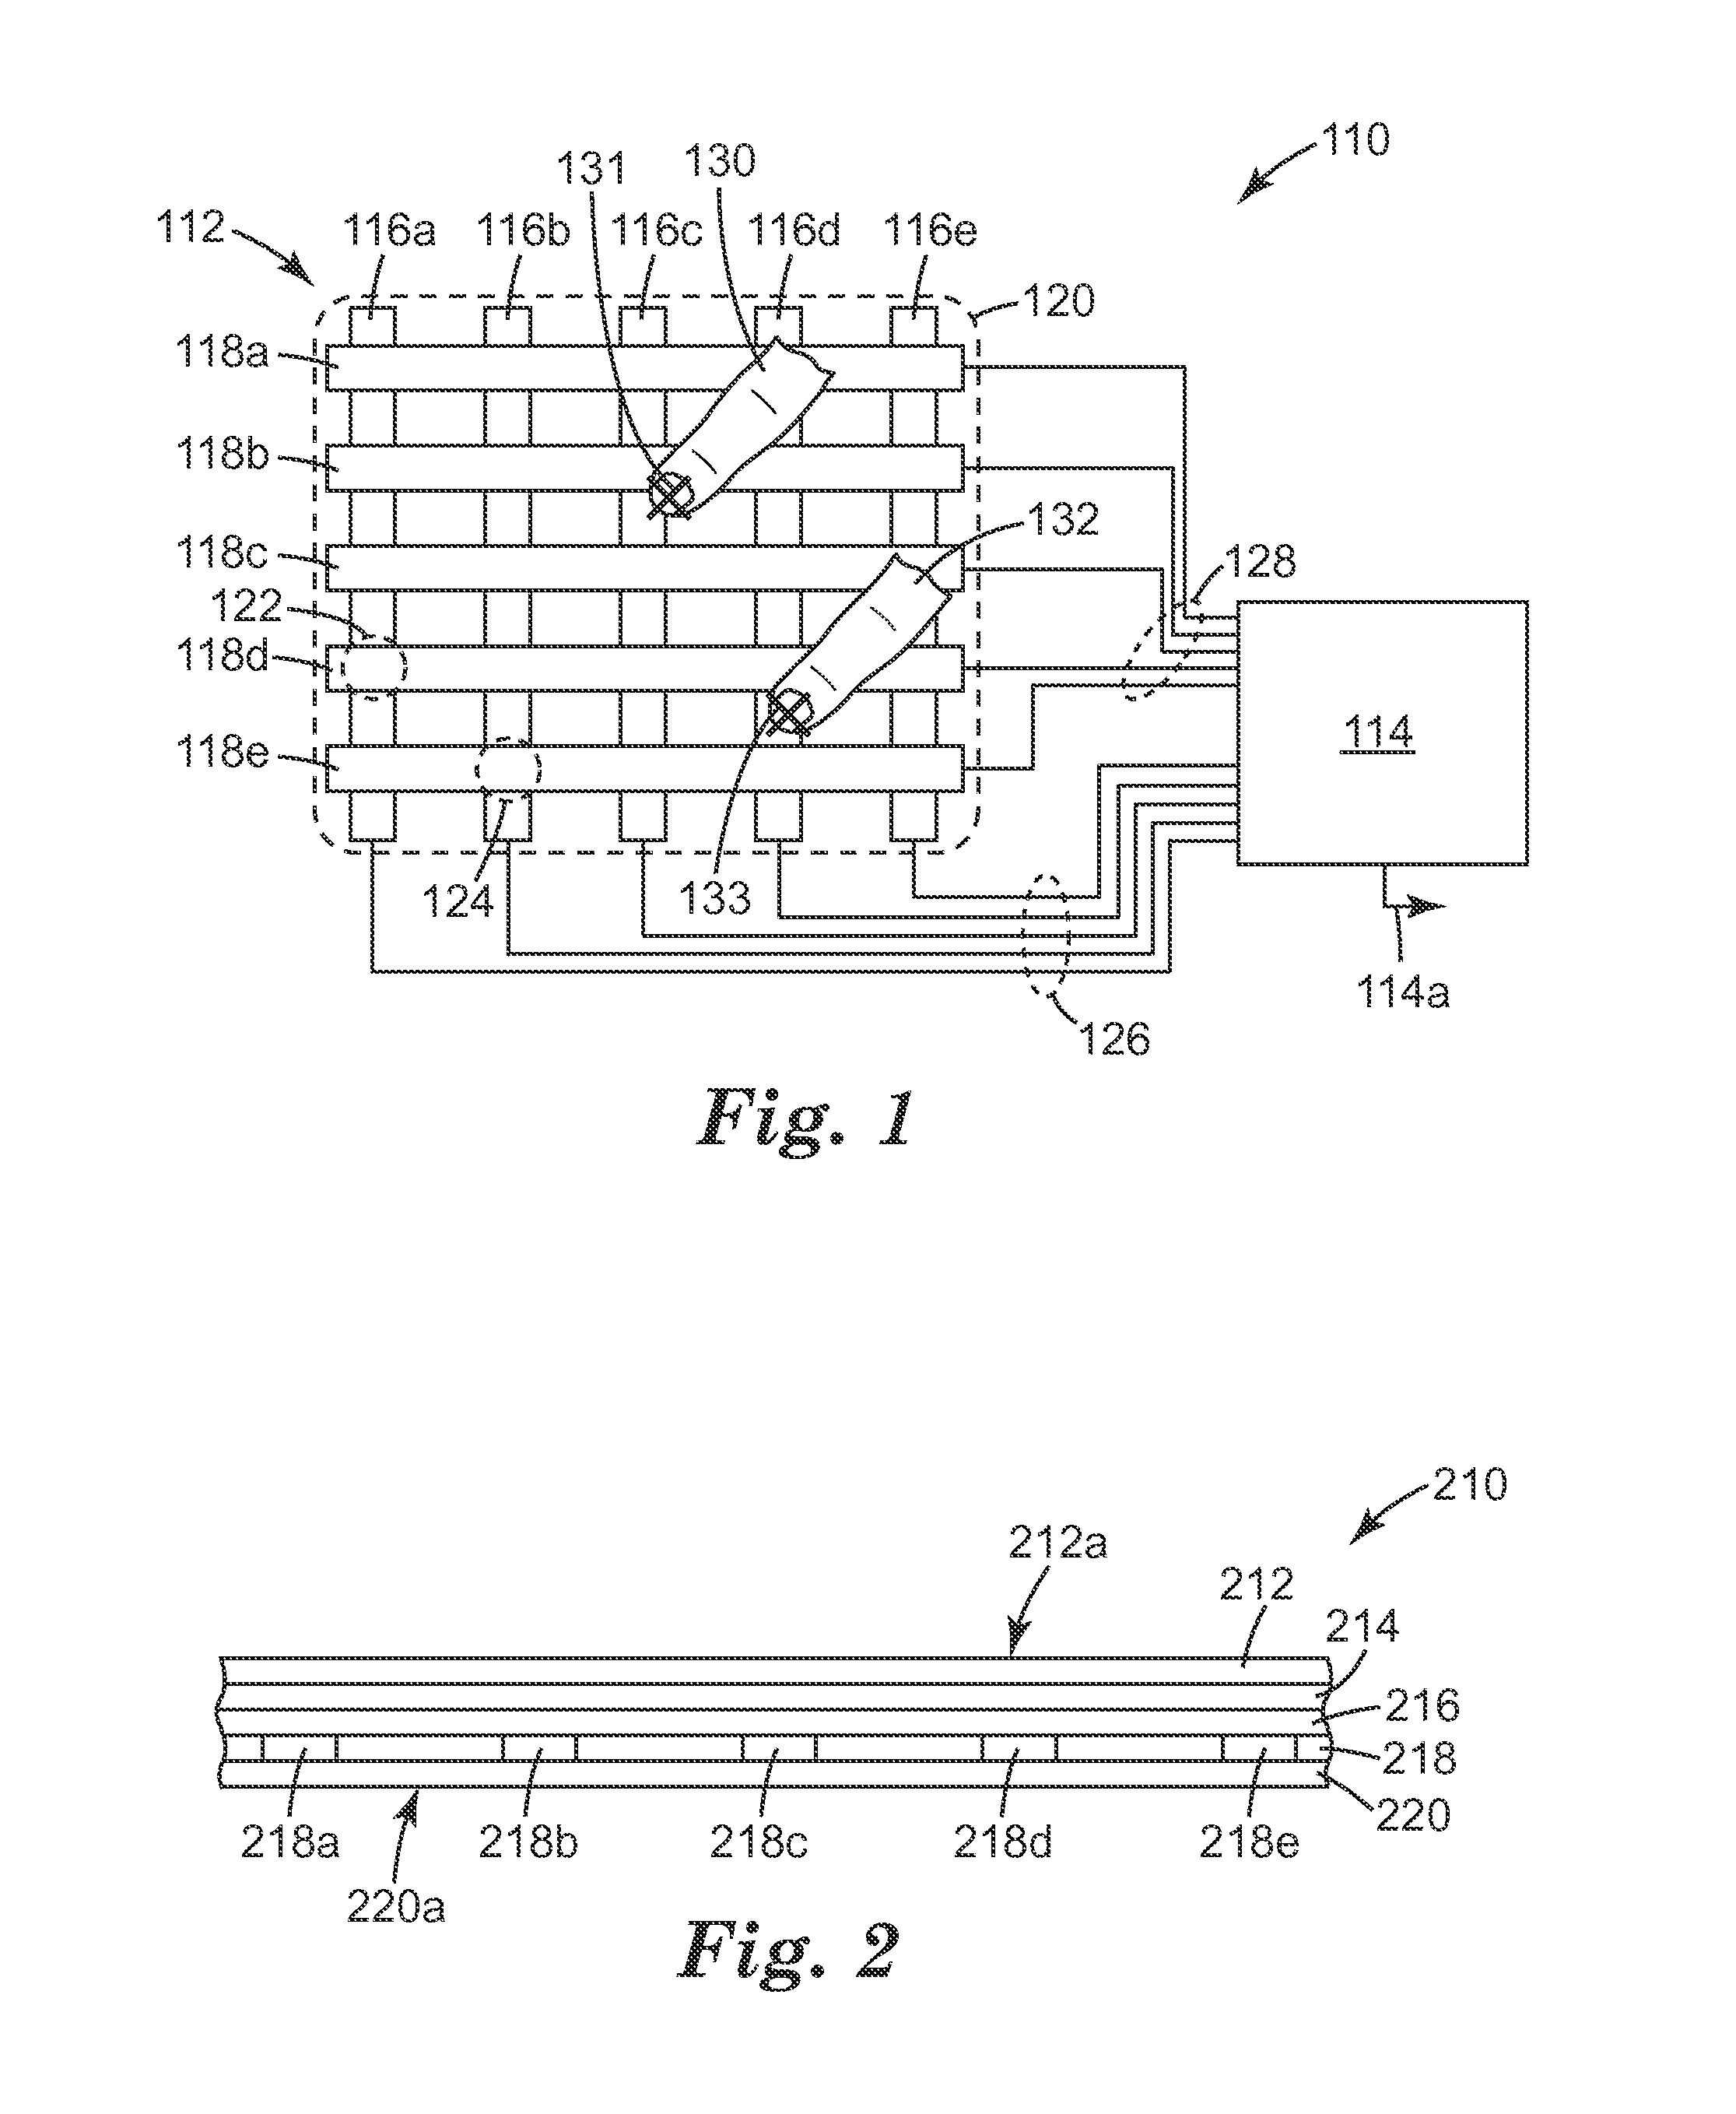 High speed multi-touch touch device and controller therefor